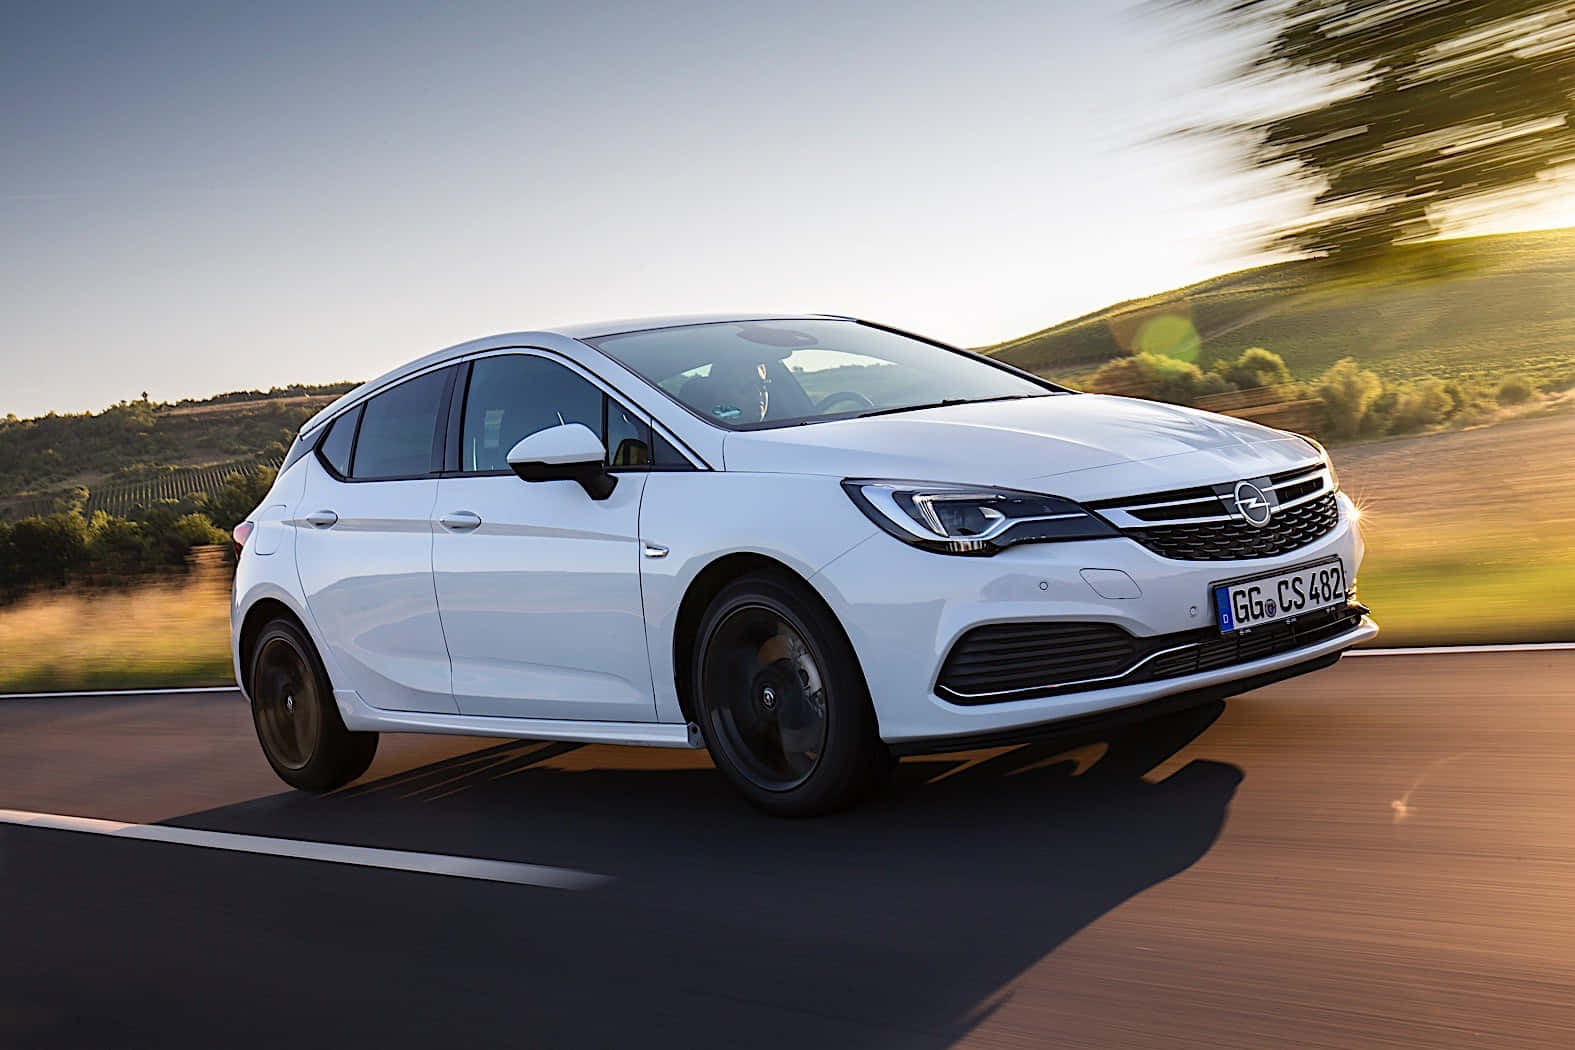 "The sleek and stylish Opel Astra in natural setting." Wallpaper